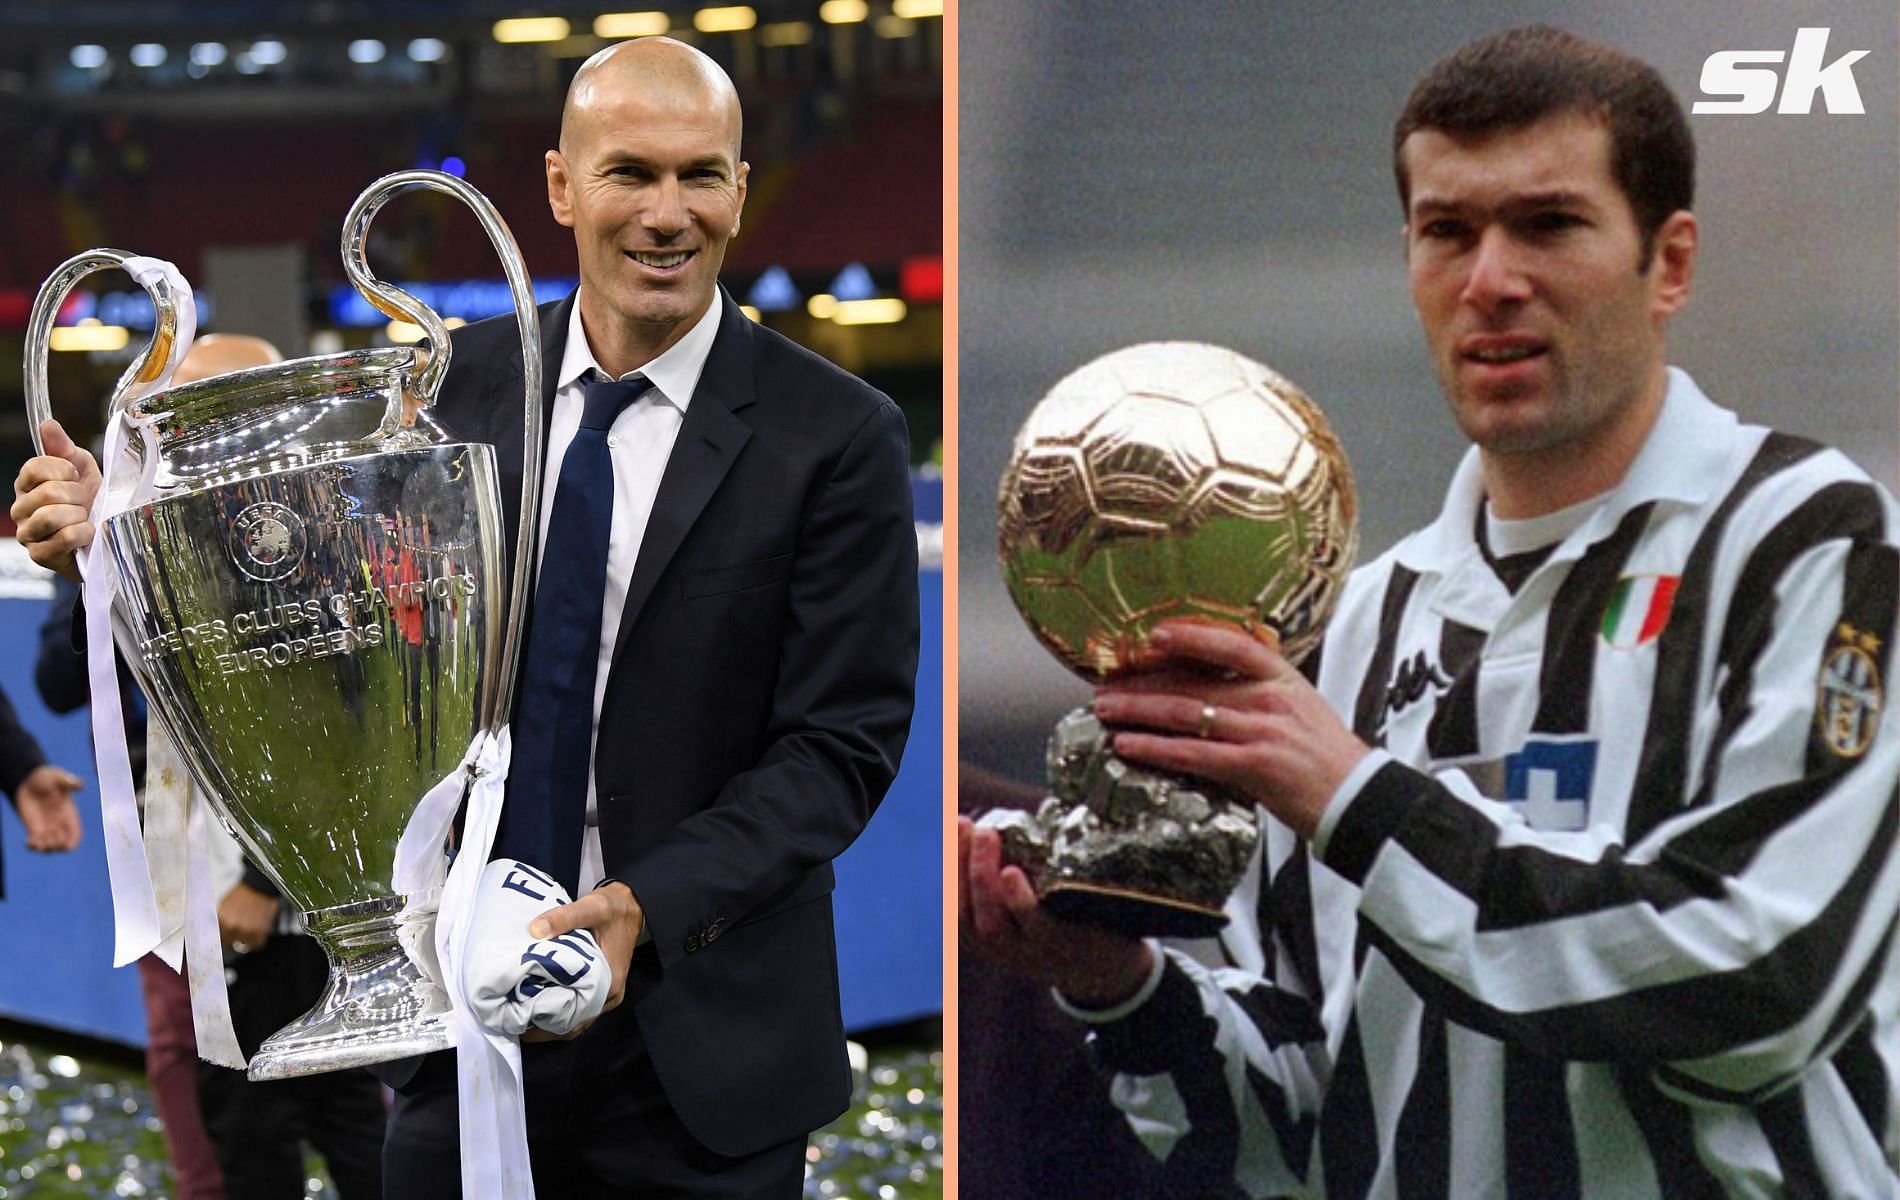 Zinedine Zidane has had a successful career as a player and a manager.